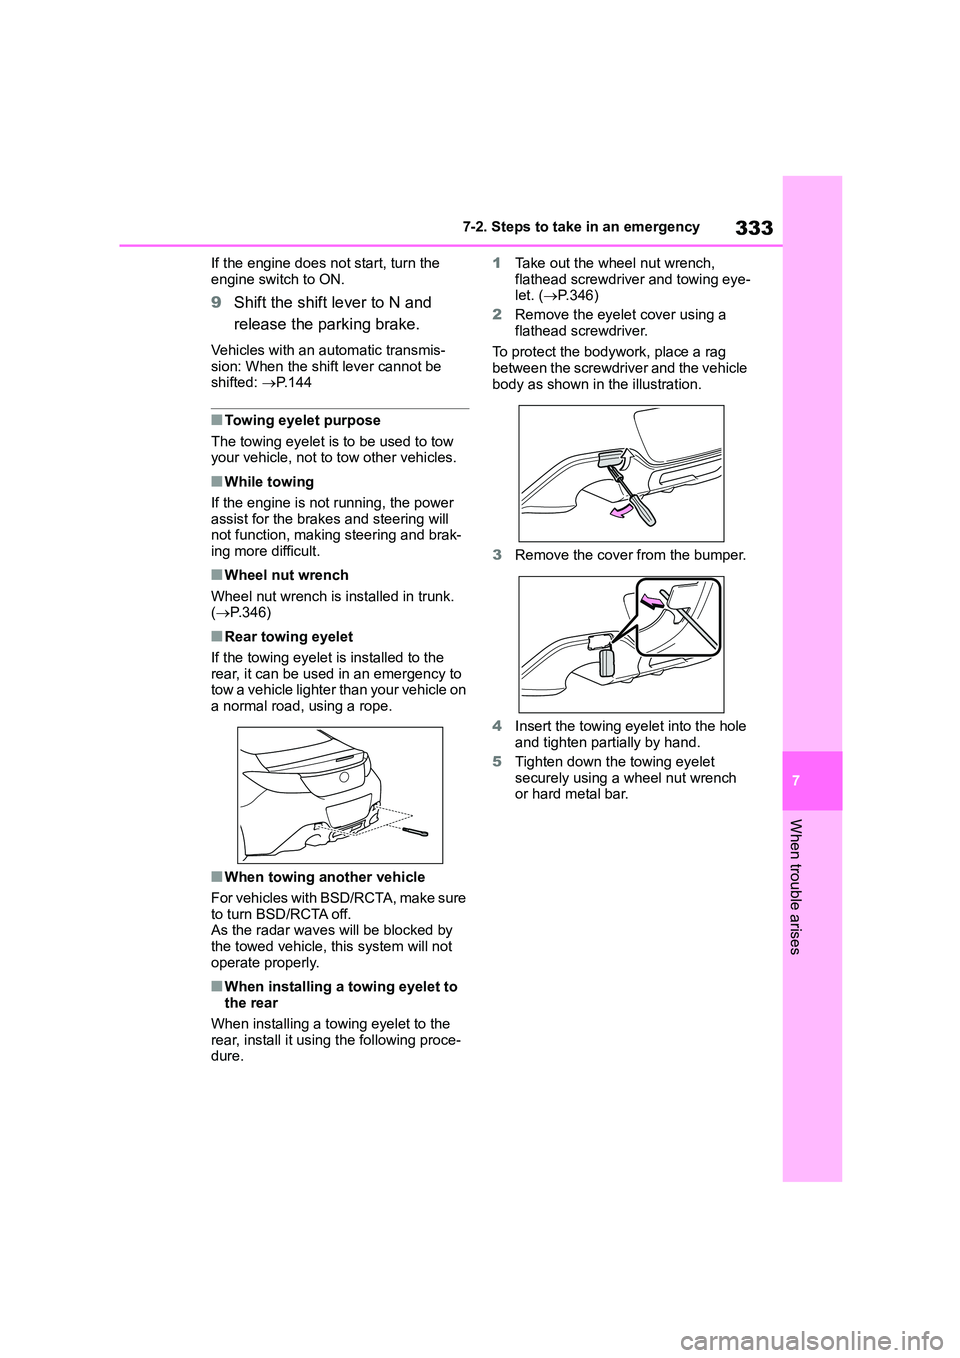 TOYOTA GR86 2022   (in English) User Guide 333
7 
7-2. Steps to take in an emergency
When trouble arises
If the engine does not start, turn the  
engine switch to ON.
9 Shift the shift lever to N and  
release the parking brake.
Vehicles with 